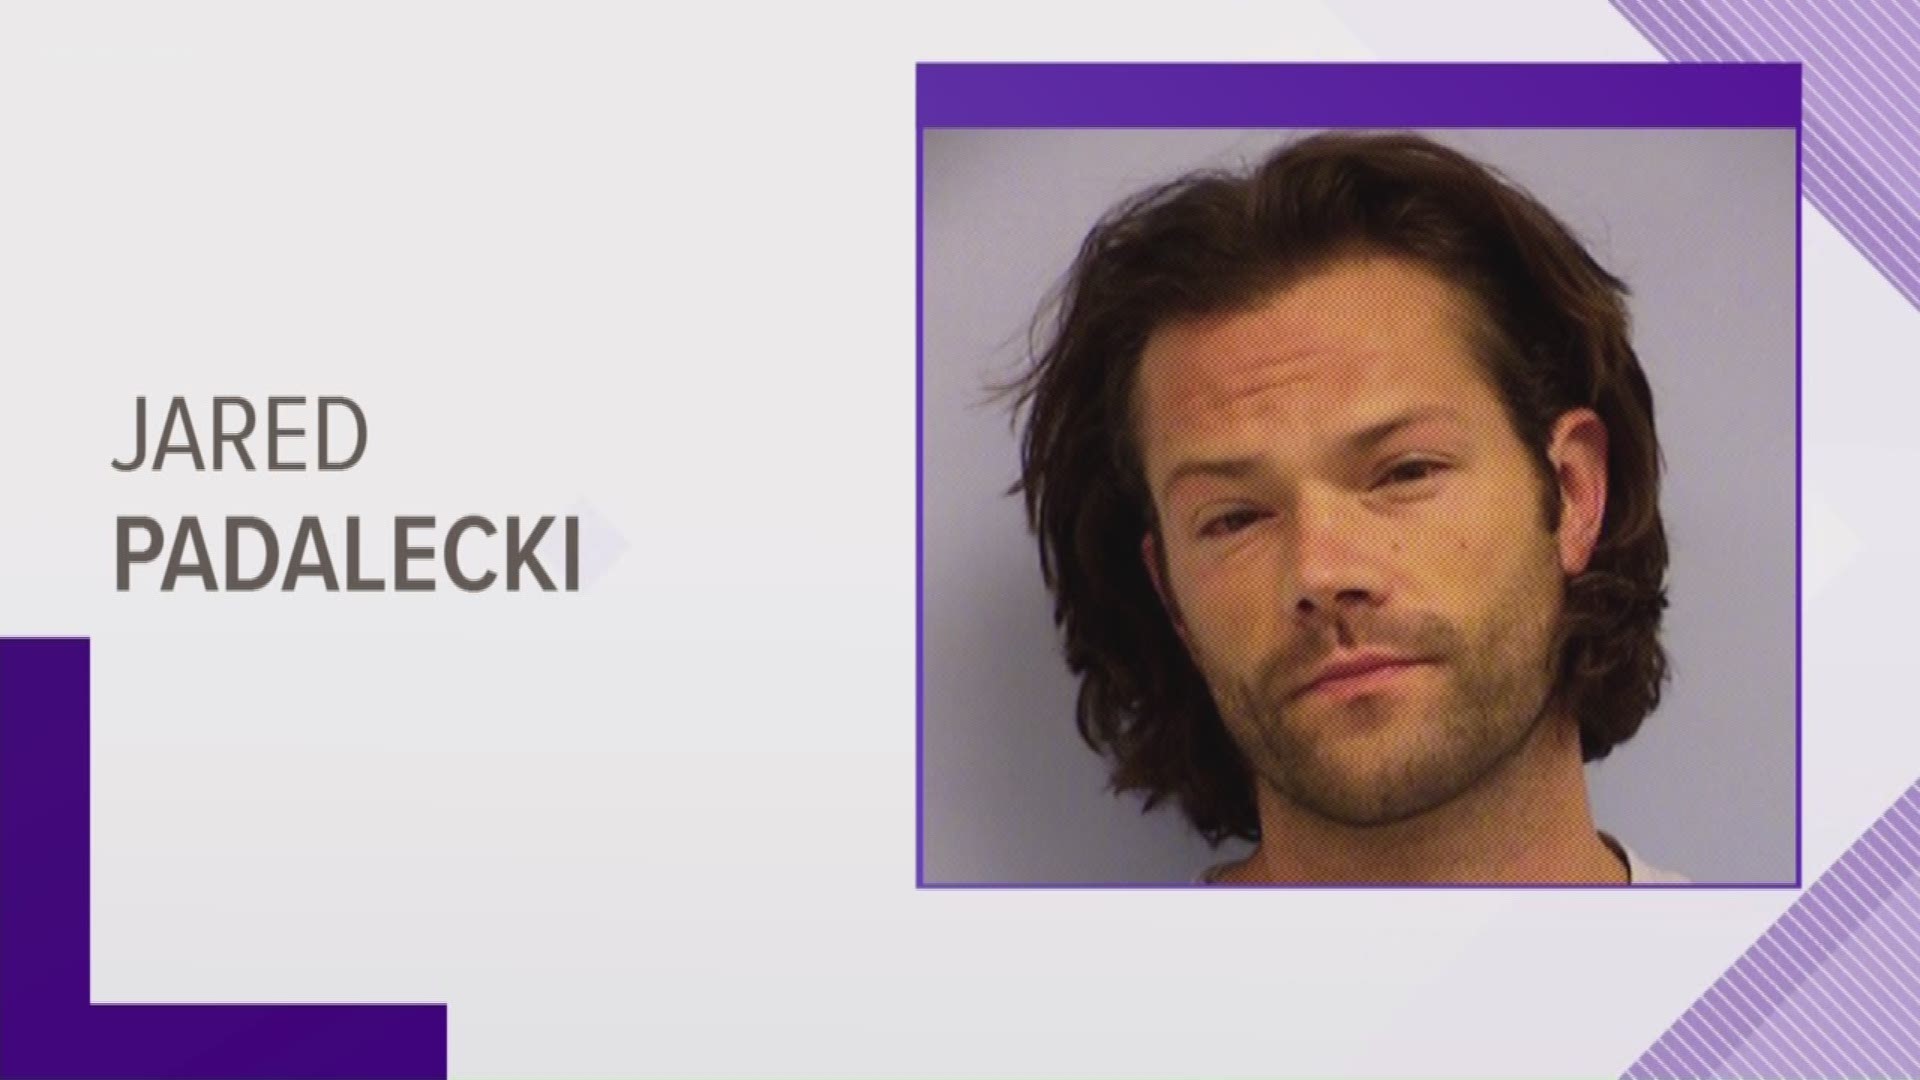 Padalecki is facing charges for assaulting two employees at Stereotype on East 6th Street – a bar he reportedly owns.